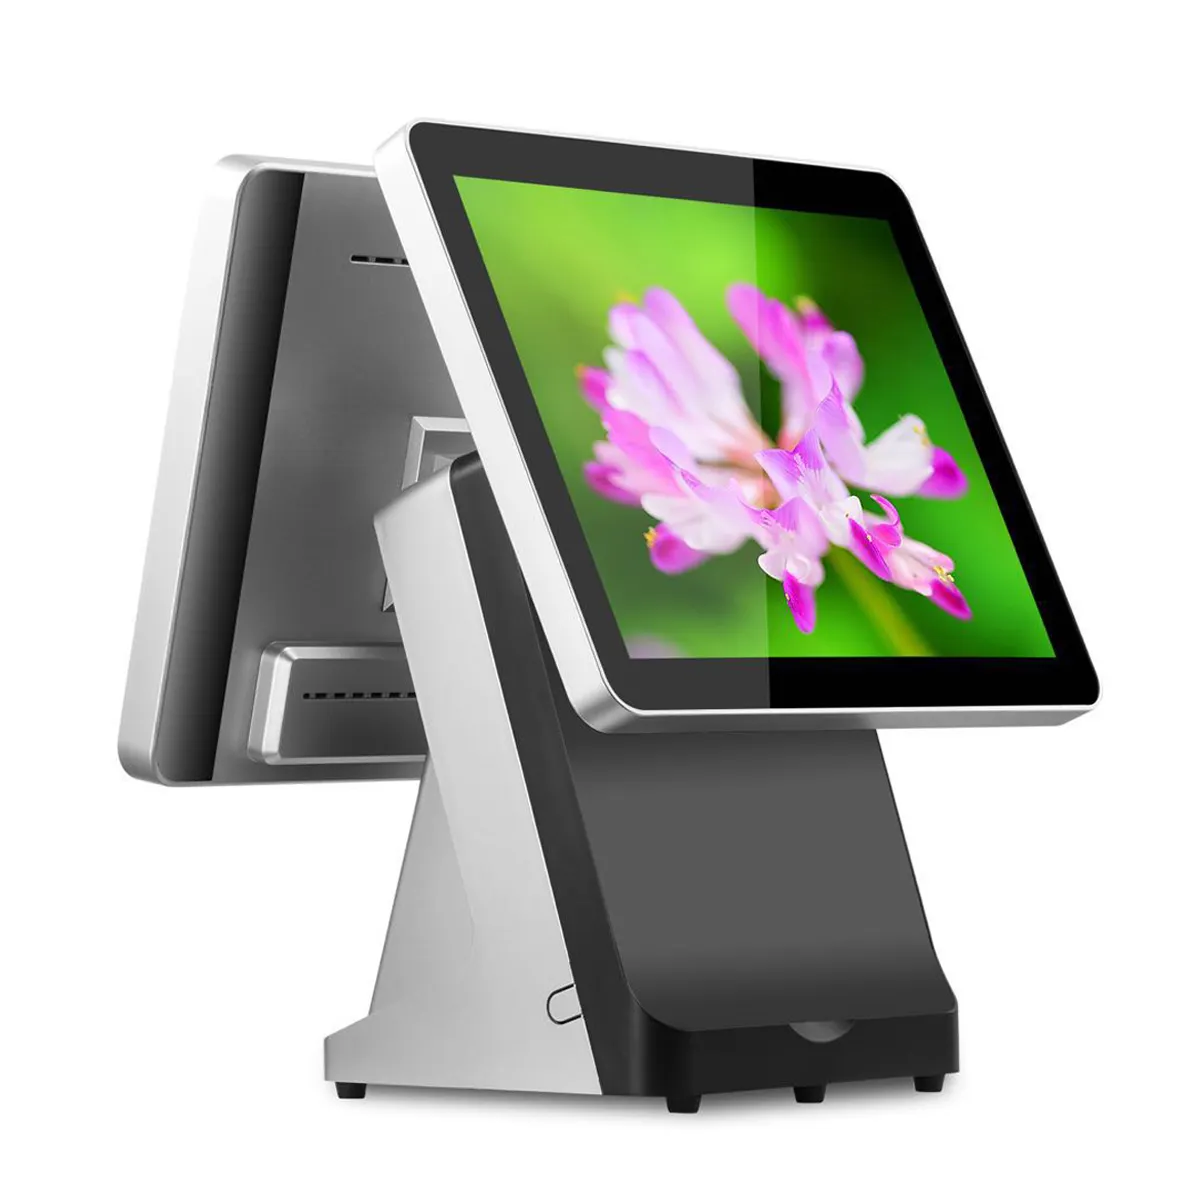 High Grade I5 POS 15inch Capacitive Touch Screen Dual POS with Built-in 80mm Thermal Printer RAM8GB SSD256GB for Retails